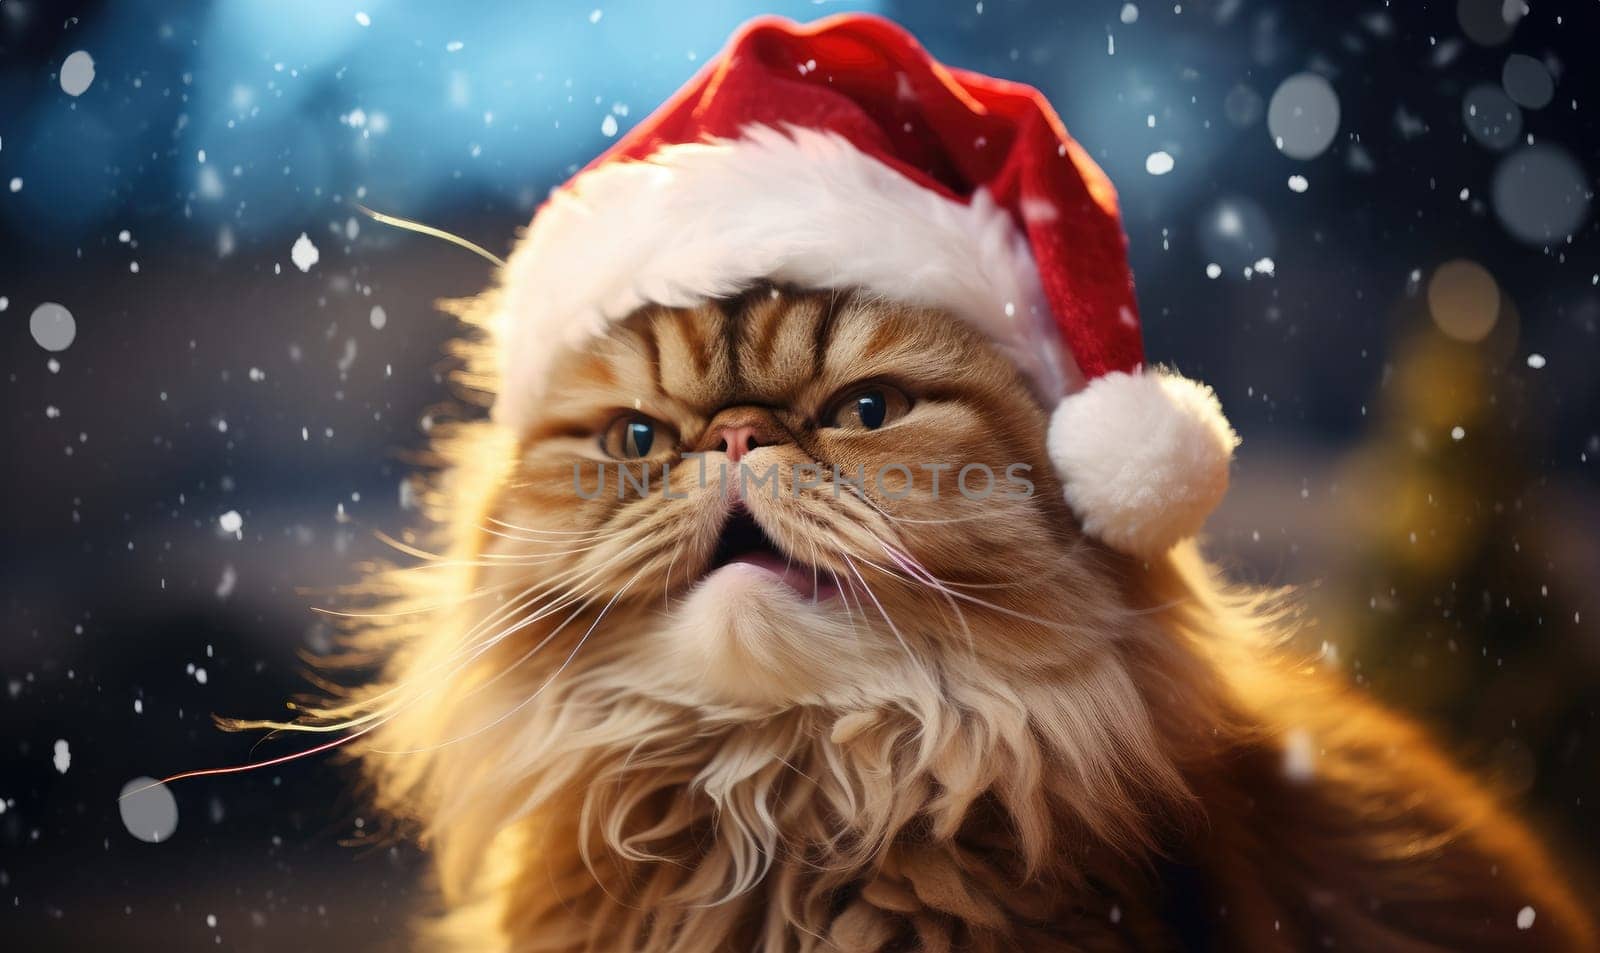 Cat in a red Santa Claus hat.  by palinchak